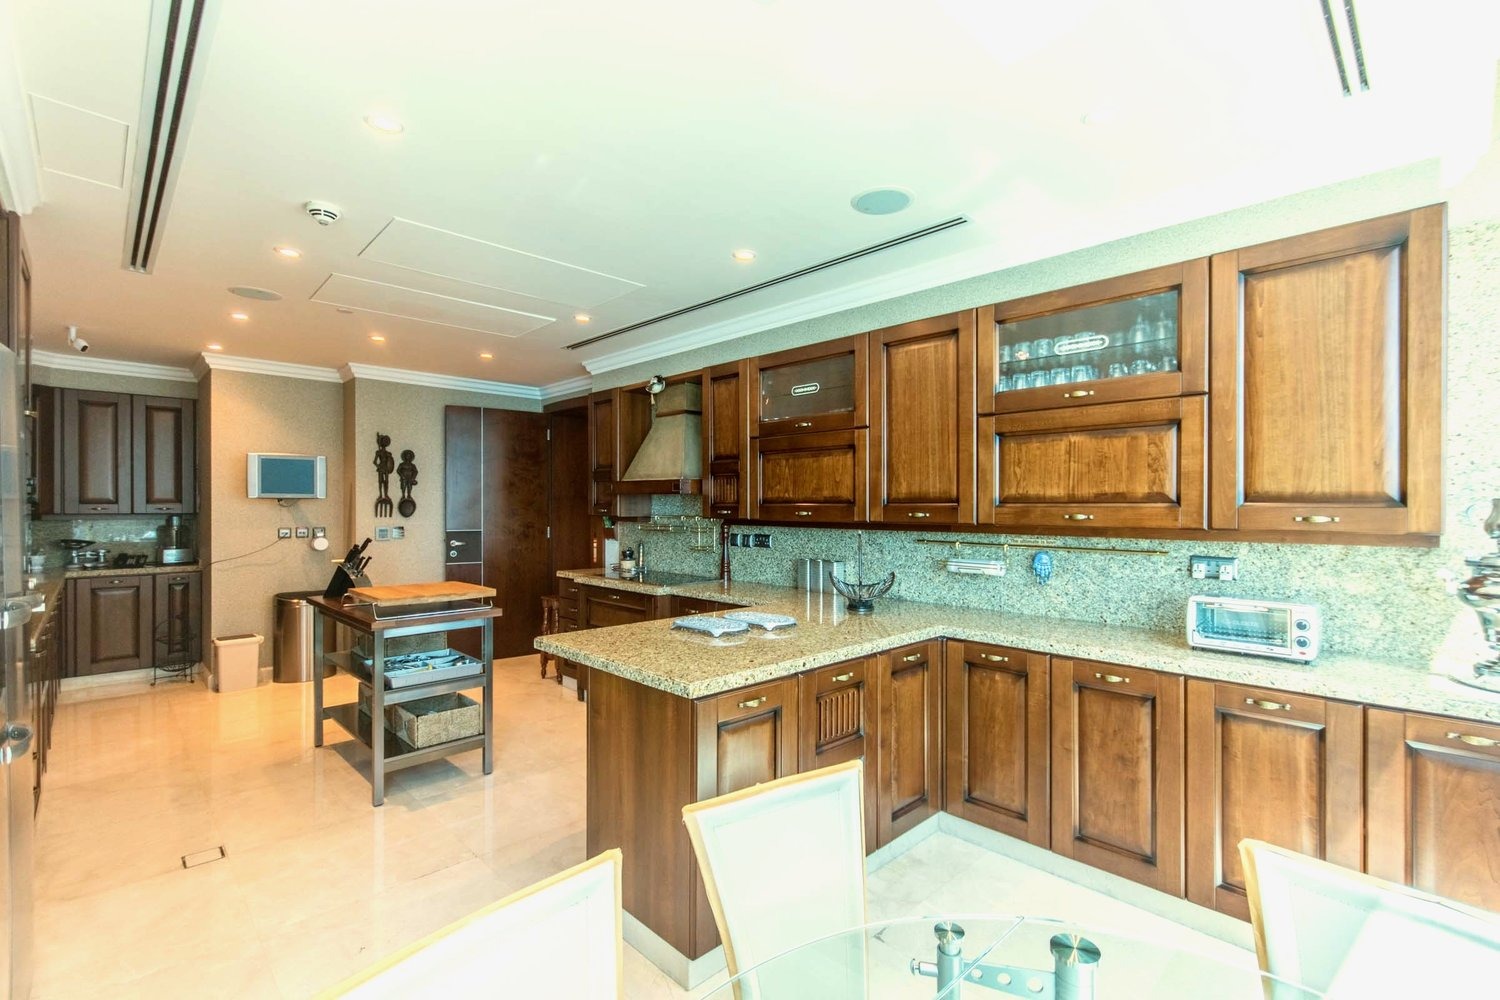 The kitchen is ideal for cooking at home